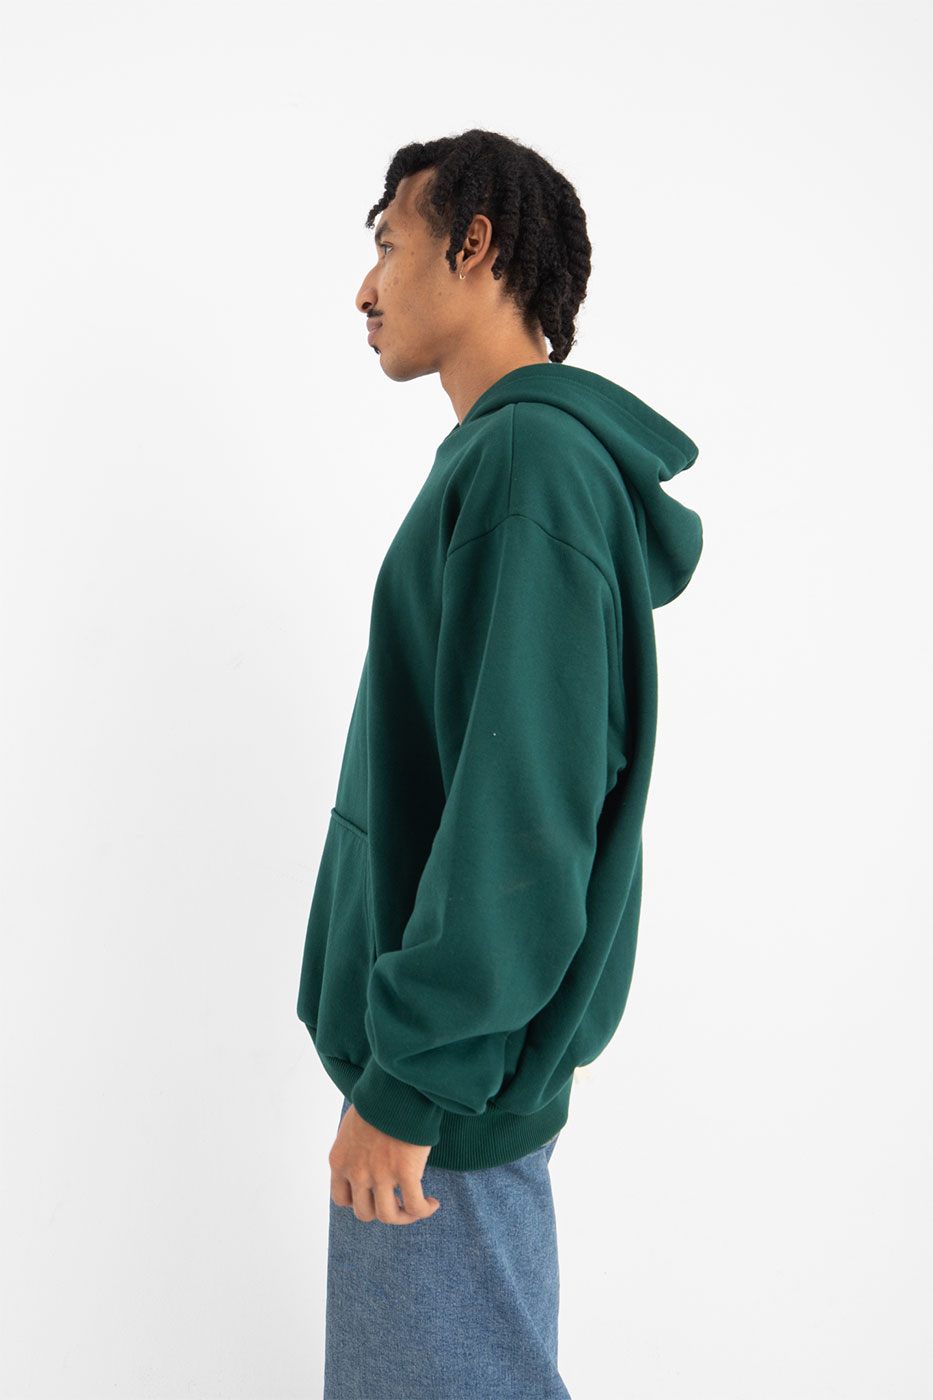 Caution Graphic Emerald Green Hoodie From Dresscode in Egypt